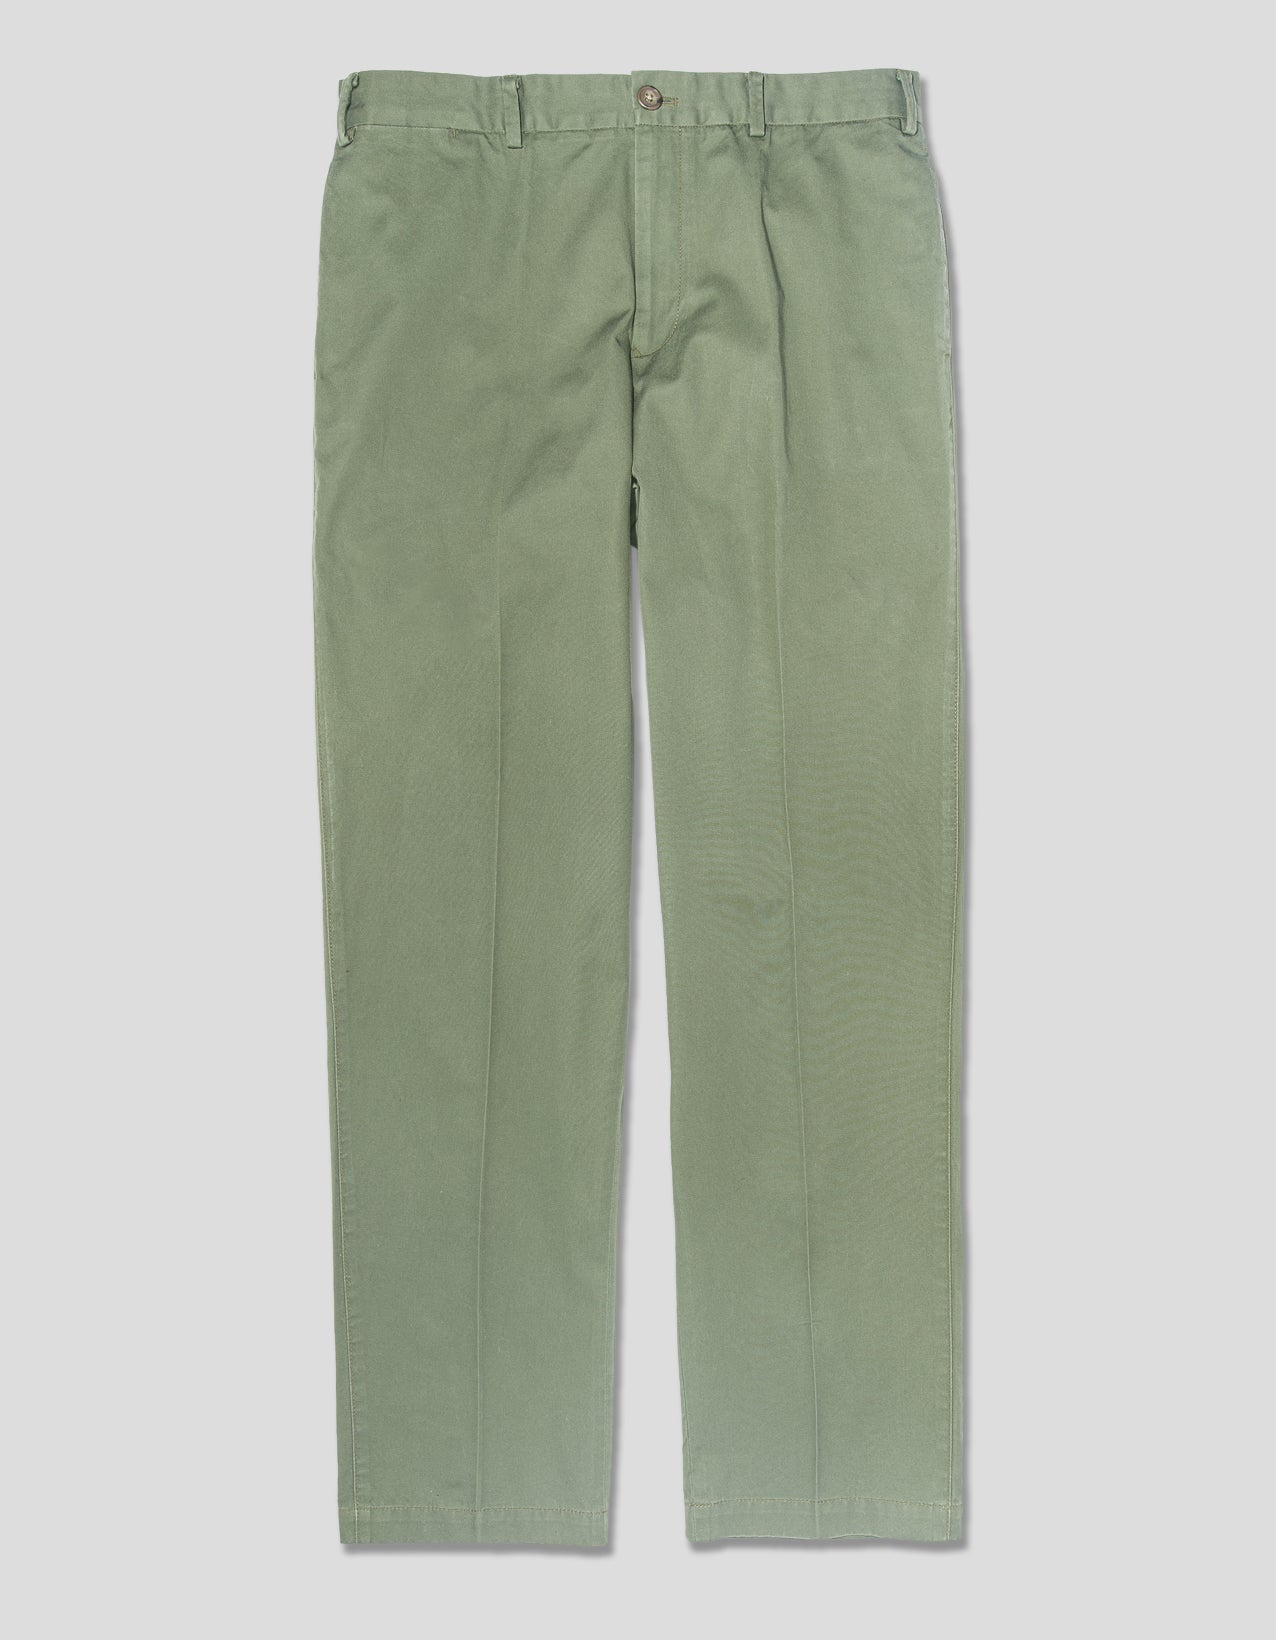 COTTON CINCH-BACK CHINO PANTS - OLIVE